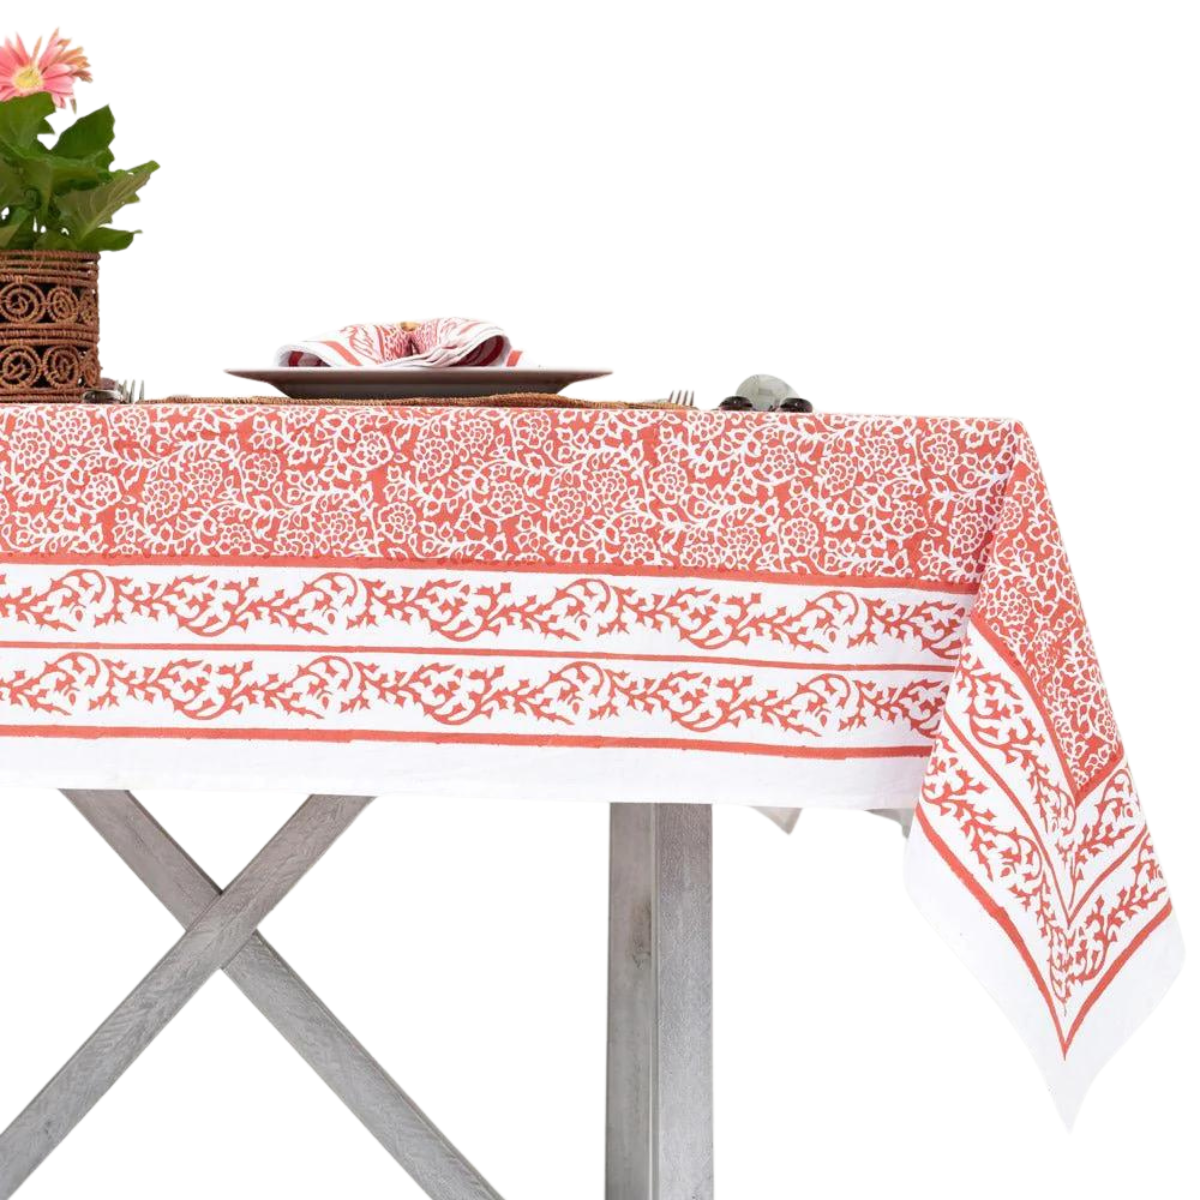 Tapestry Persimmon Tablecloth 60"x120"